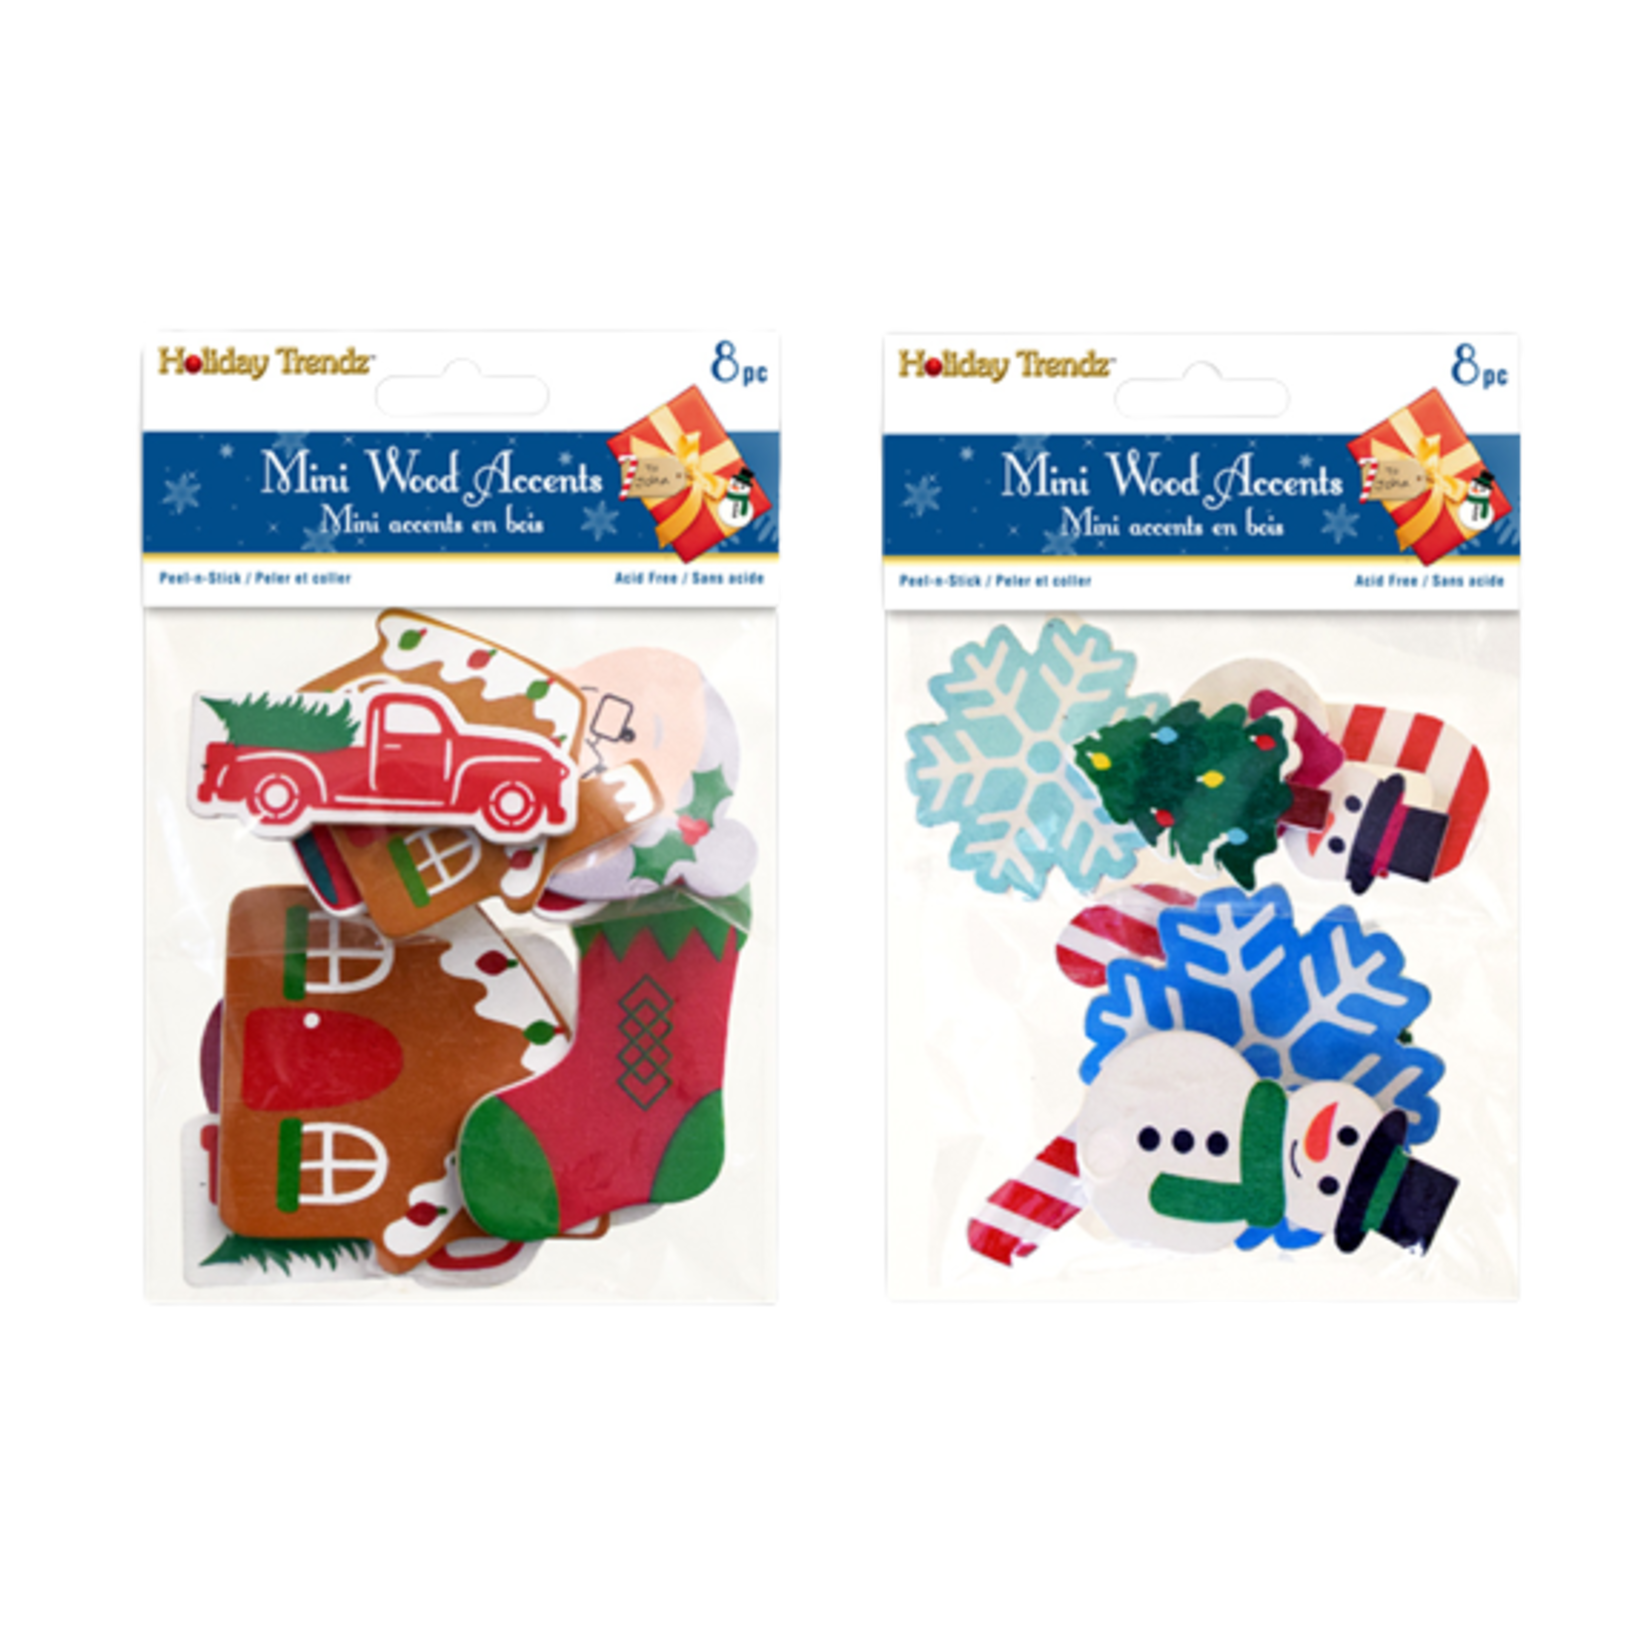 PAINTED MINI WOOD ACCENTS PEEL-N-STICK, HOLIDAY ICONS